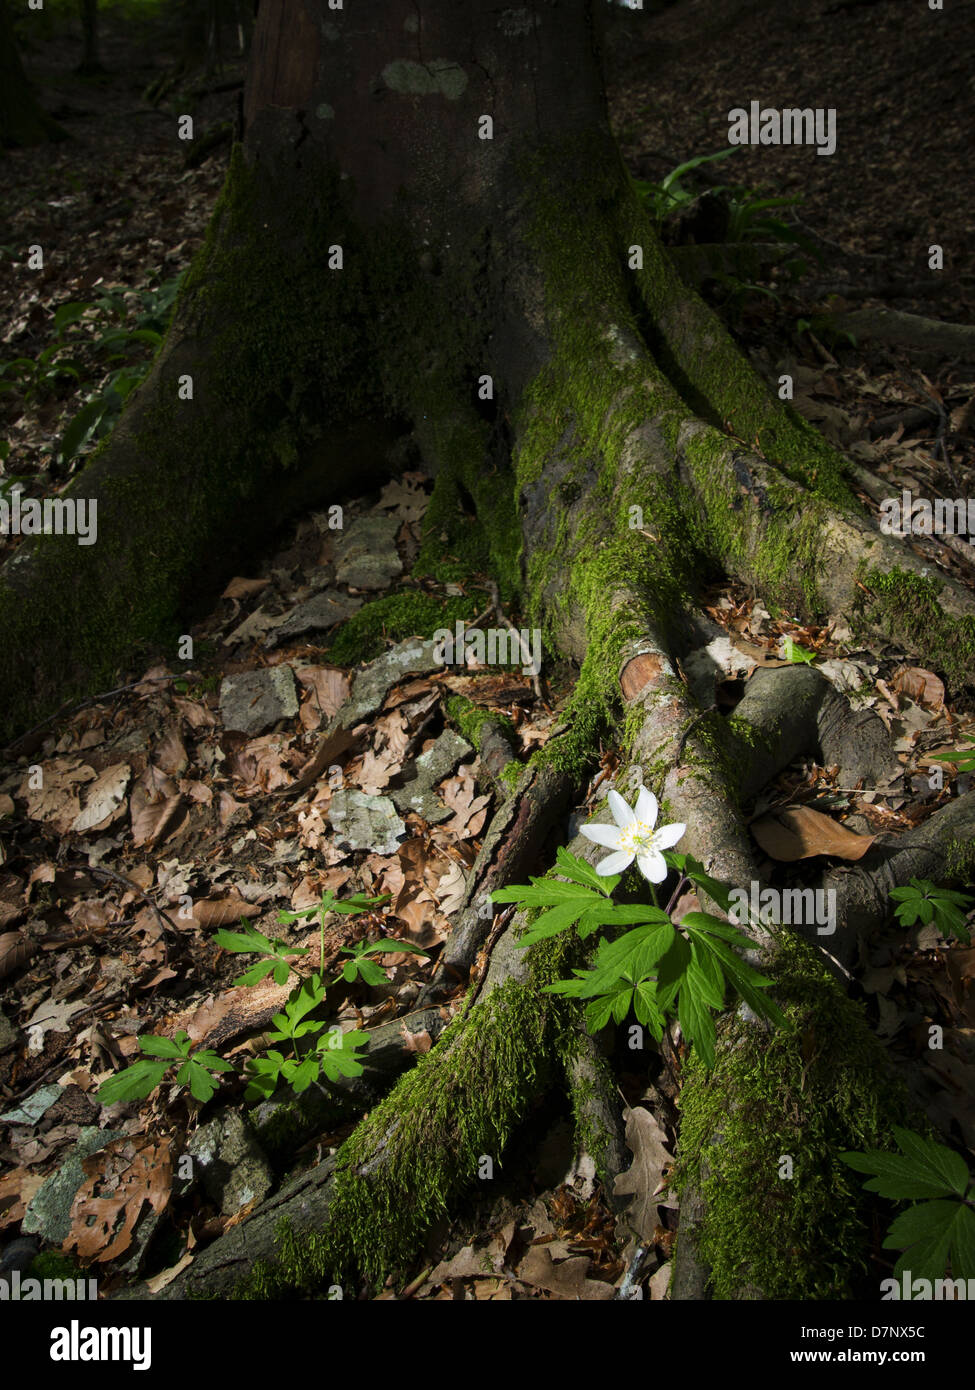 Flower at a tree base (anemone) Stock Photo